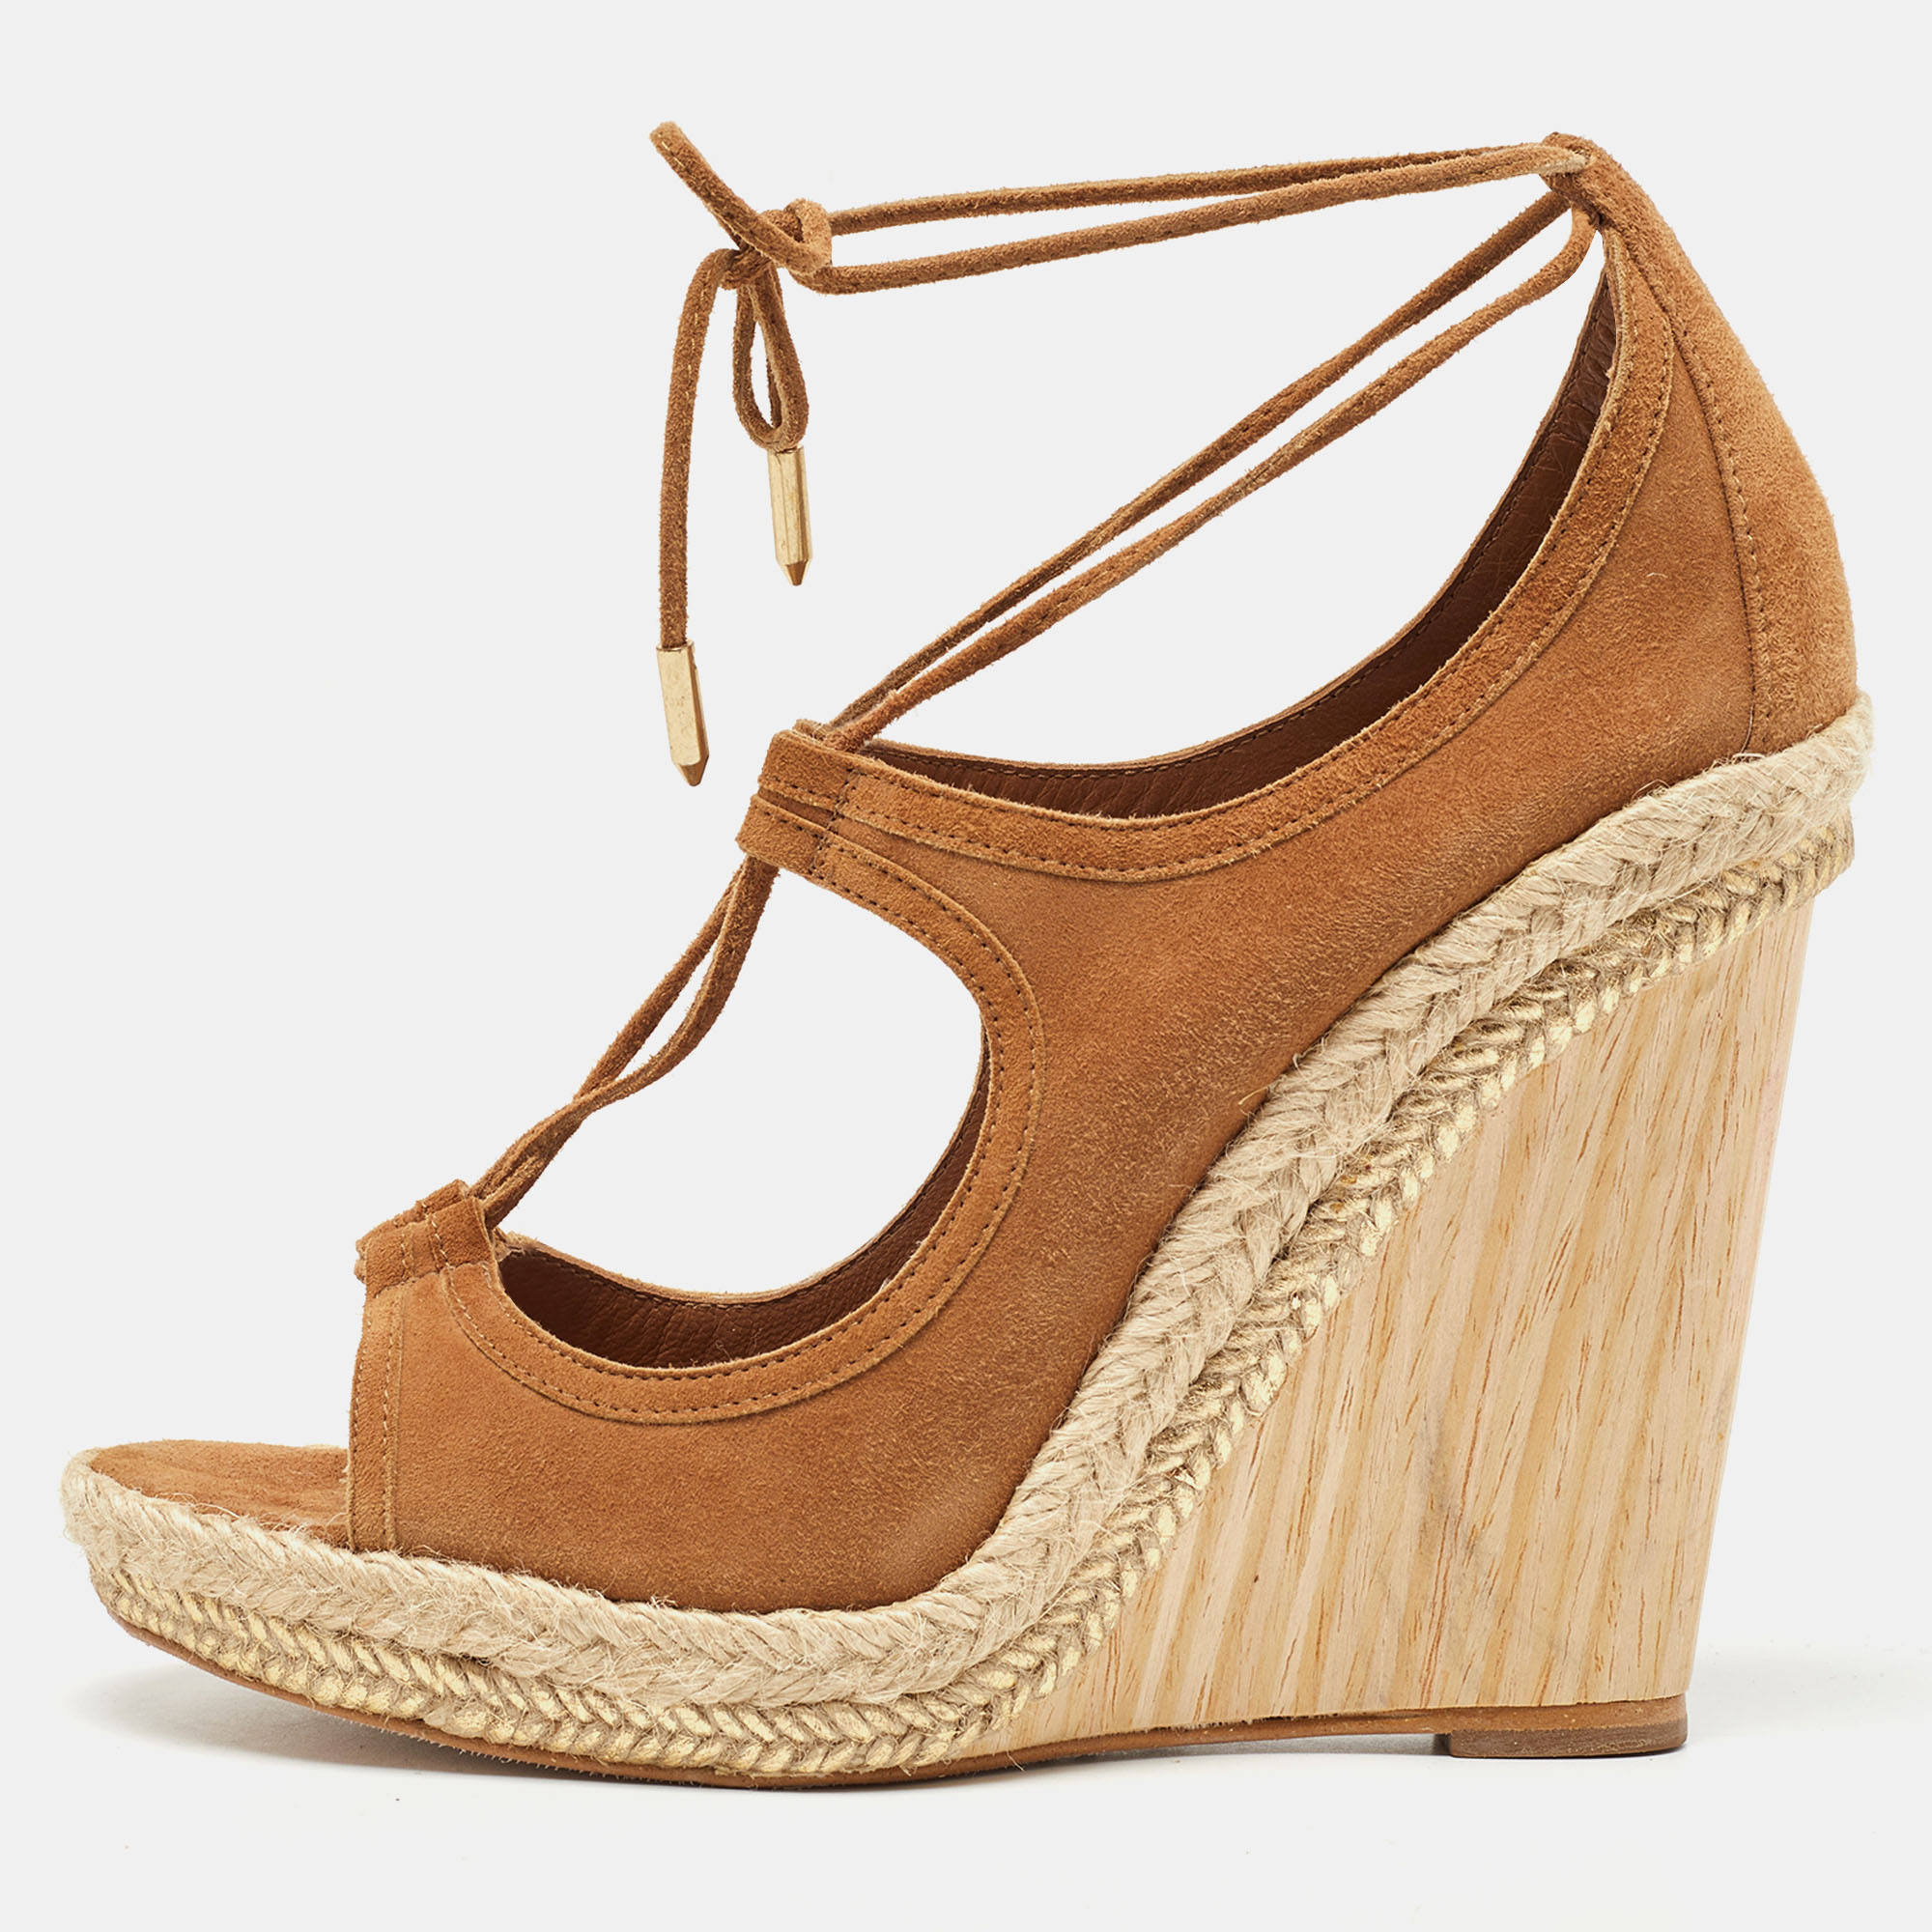 A perfect everyday wear shoe that is effortlessly stylish and easy to wear these Aquazzura Sexy Thing wedge sandals will look great with both casual and dressy looks. Constructed in brown suede material these shoes feature cutout details through the front and side and a lace tie up around the ankles to secure them in place.